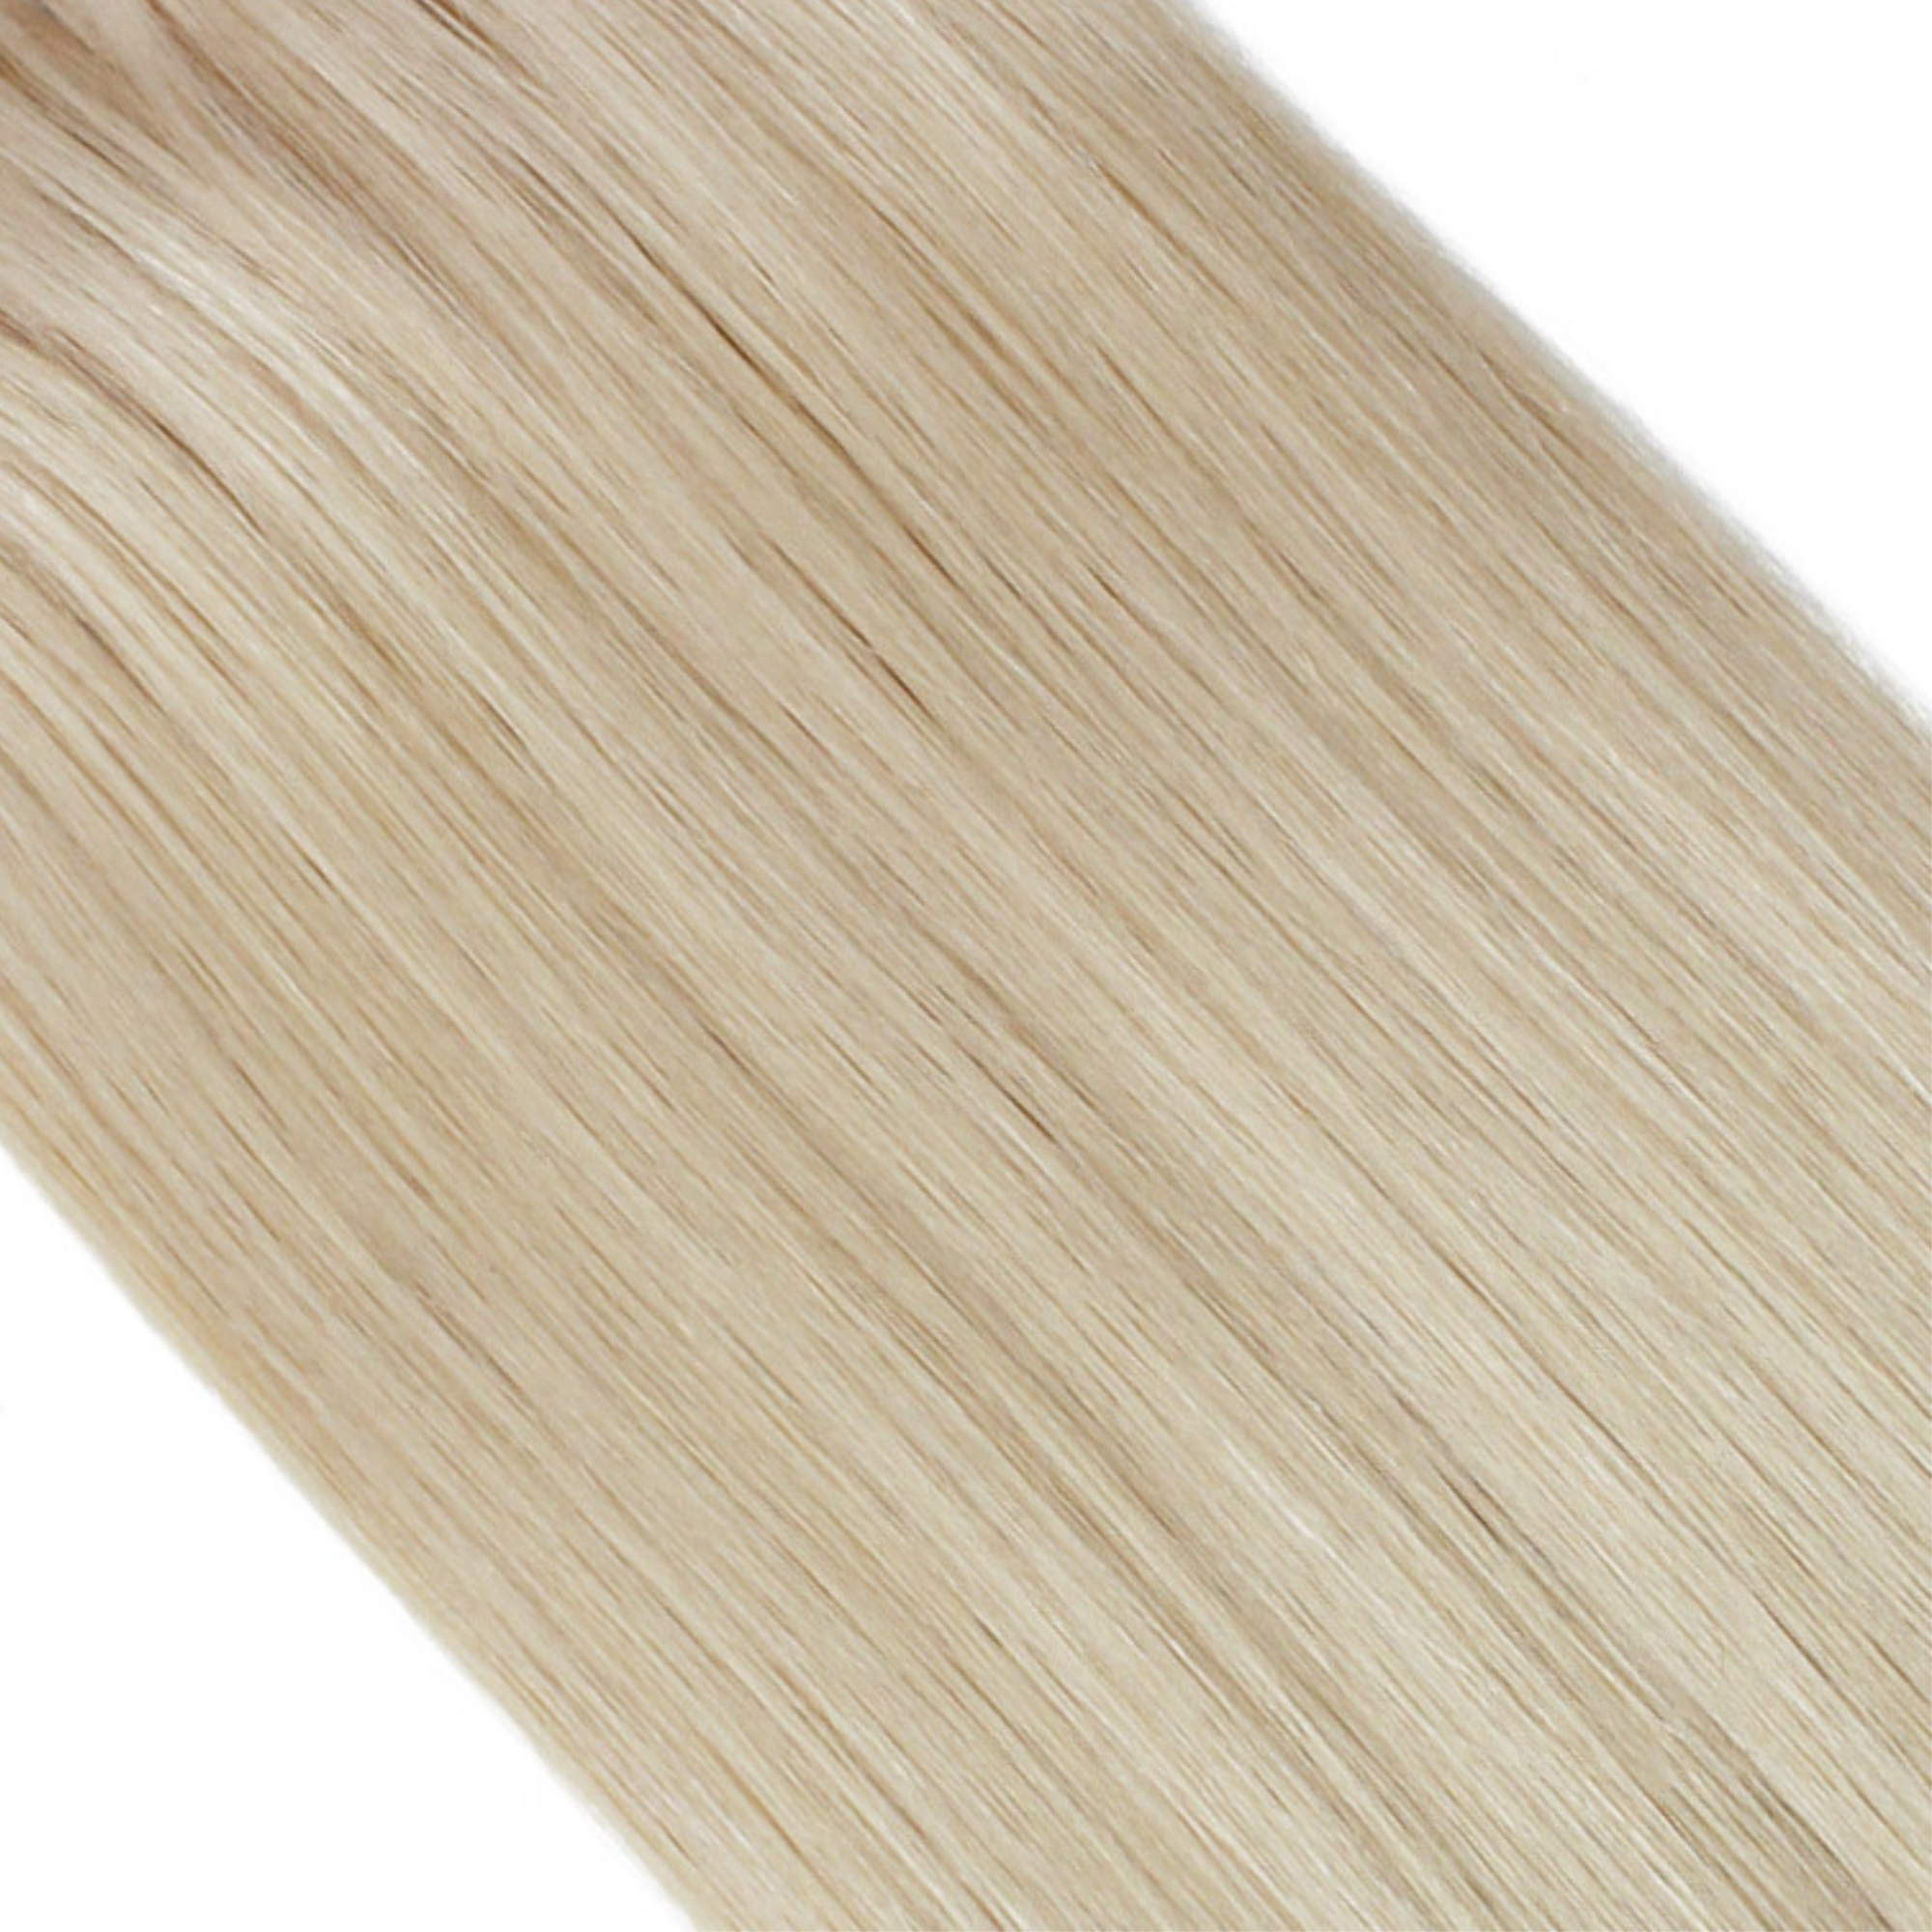 "hair rehab london 18" tape hair extensions shade swatch titled blonde af"